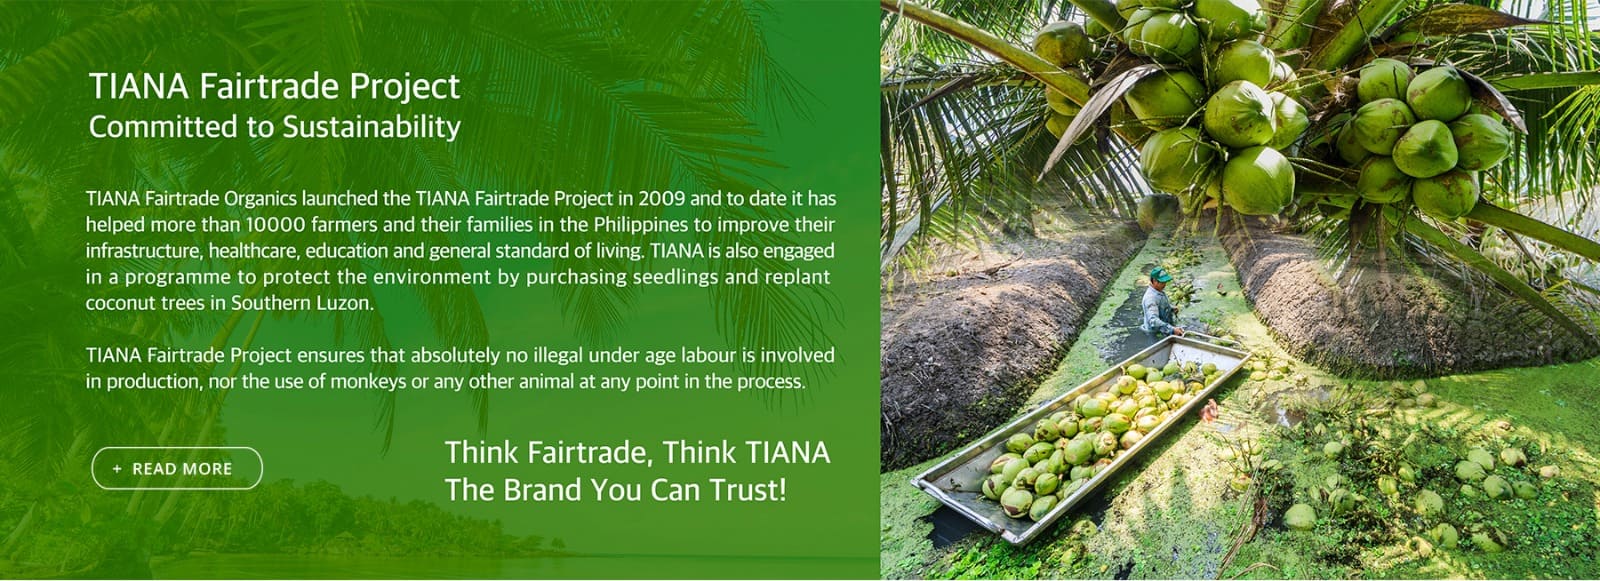 fairtrade-project